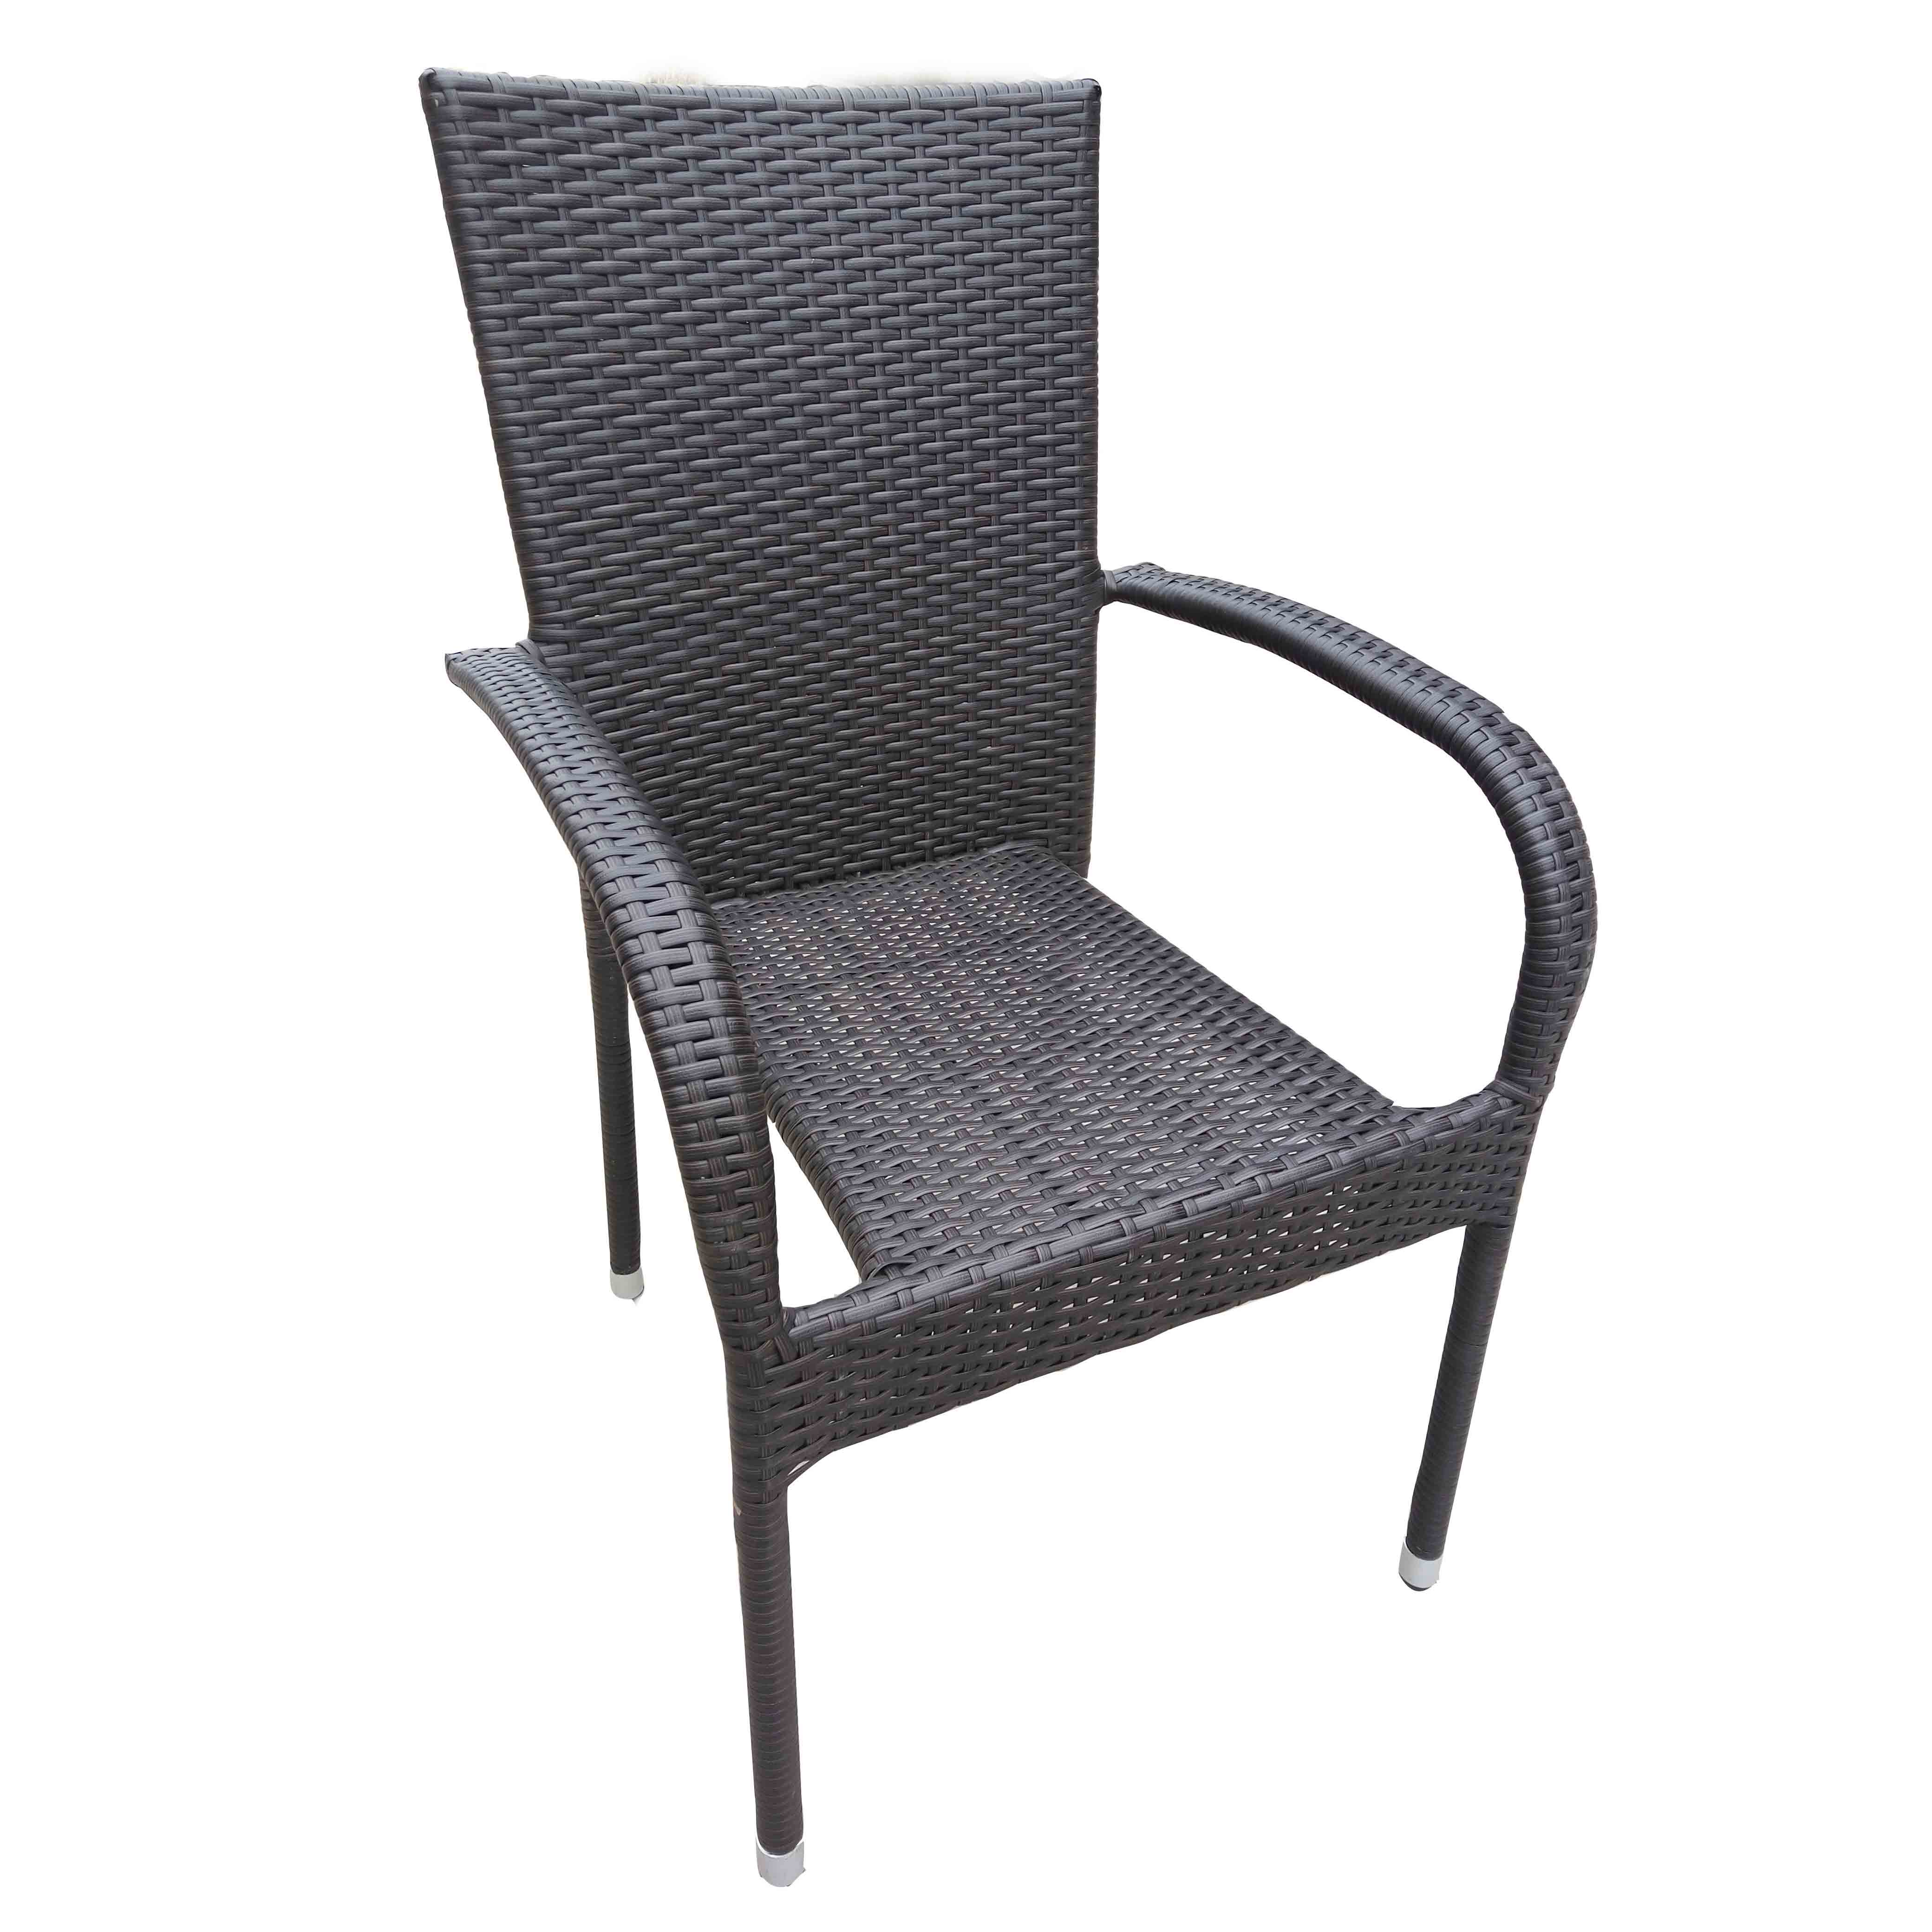 JJC1013W Steel rattan stackable dinning chair Featured Image